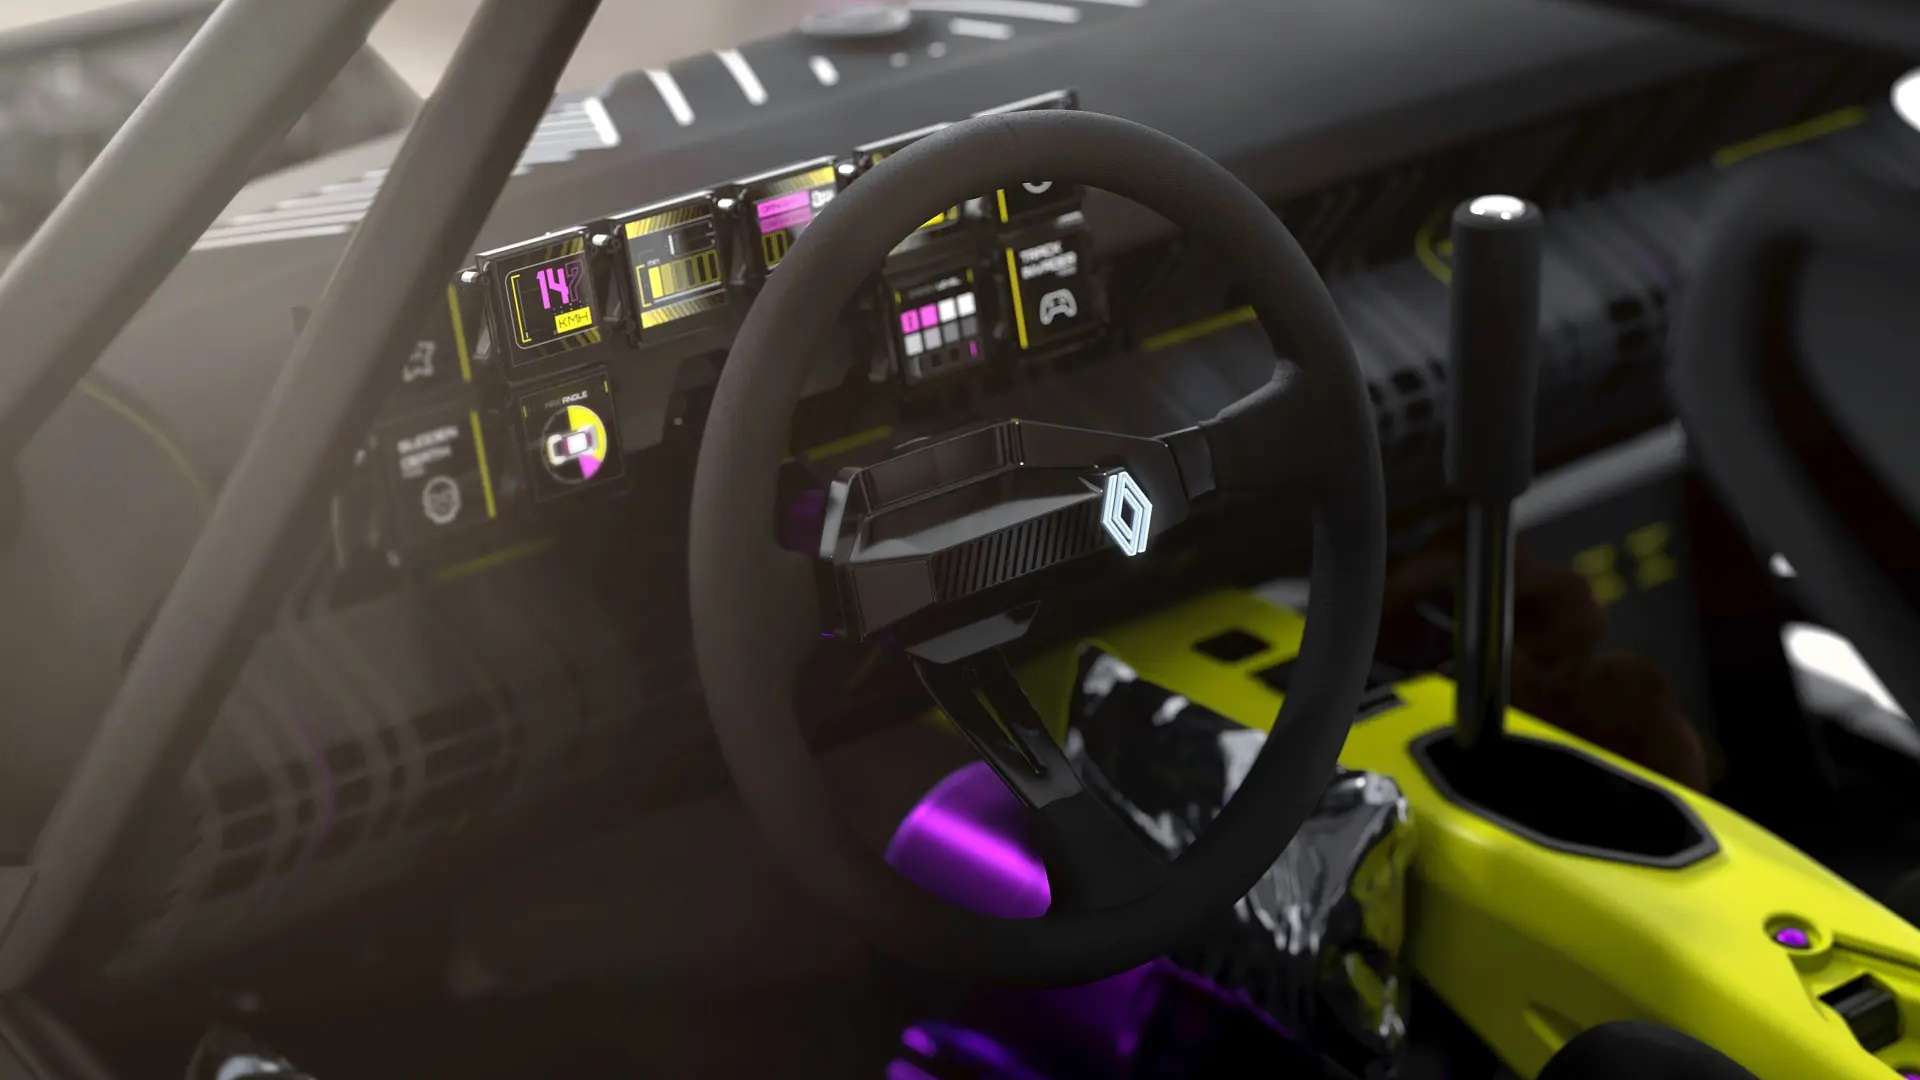 The Interior Is Digital But Retro At The Same Time, With The Design Of The Renault 5 Dashboard And Ten Mini Screens To Provide Information On All Parameters To The Driver-Pilot